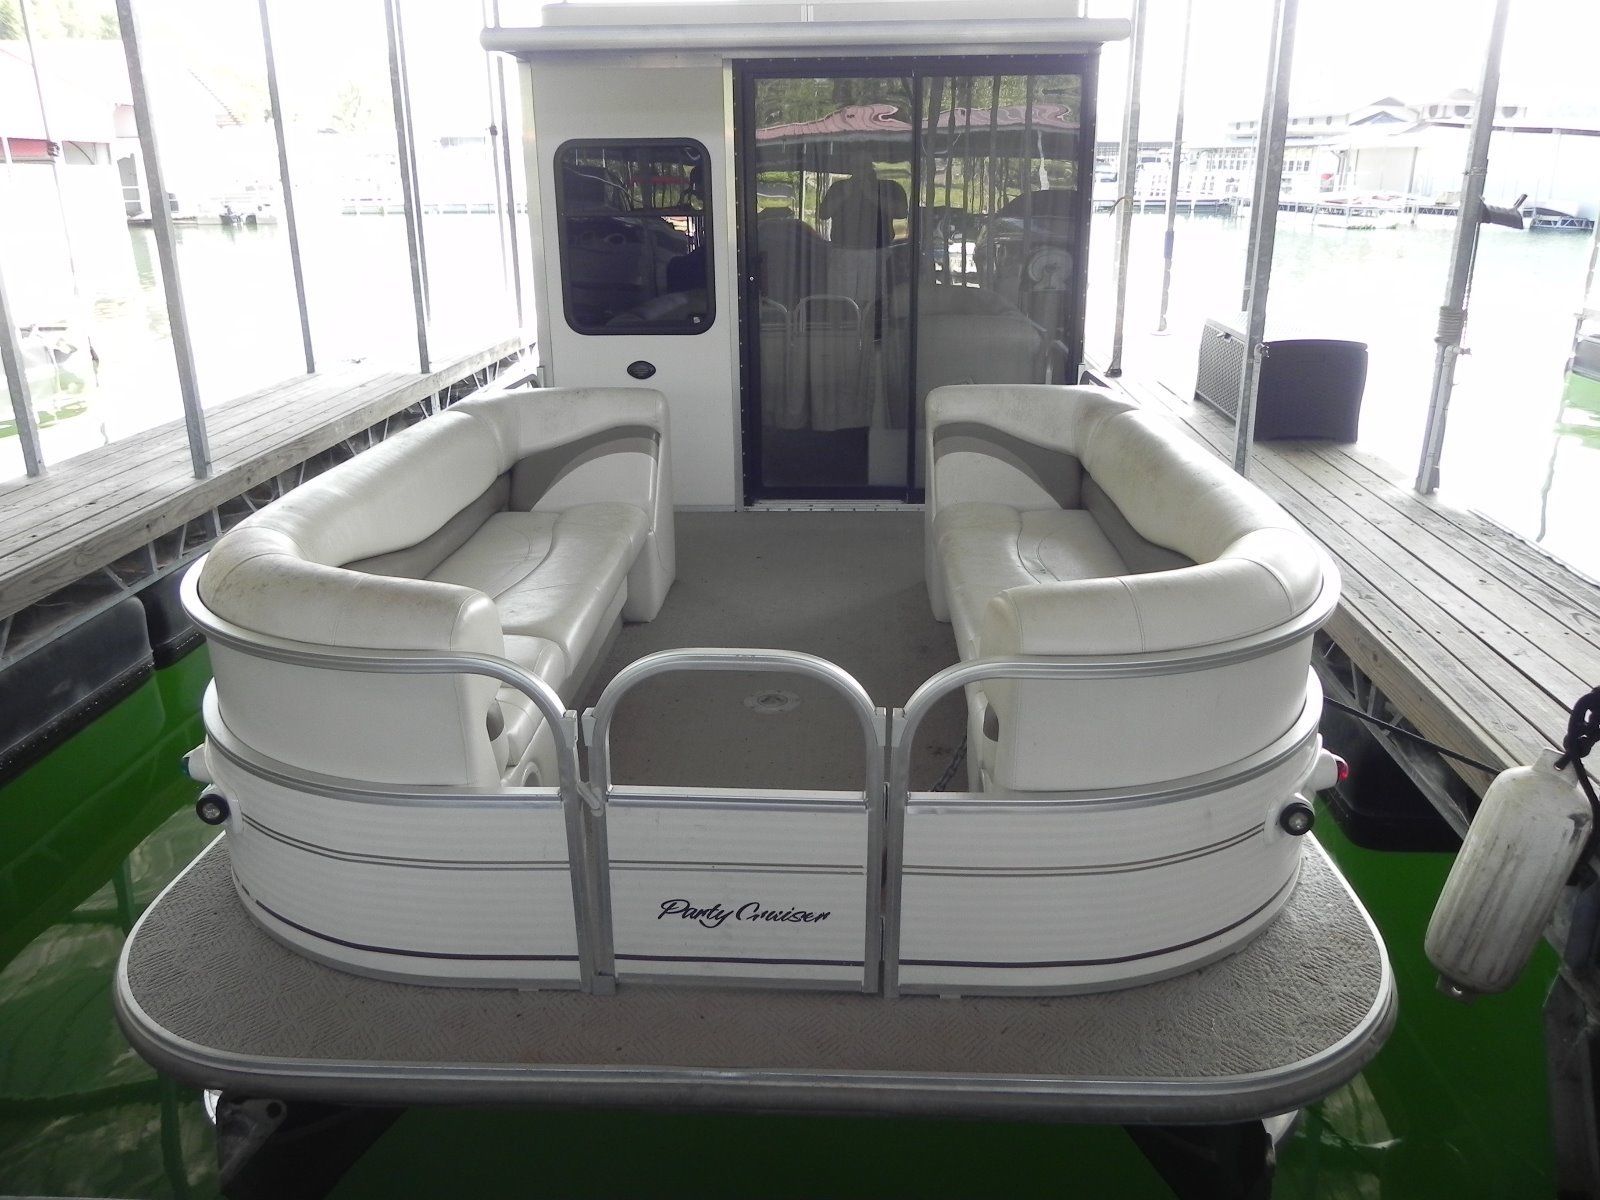 Sun Tracker 2005 for sale for $22,500 - Boats-from-USA.com